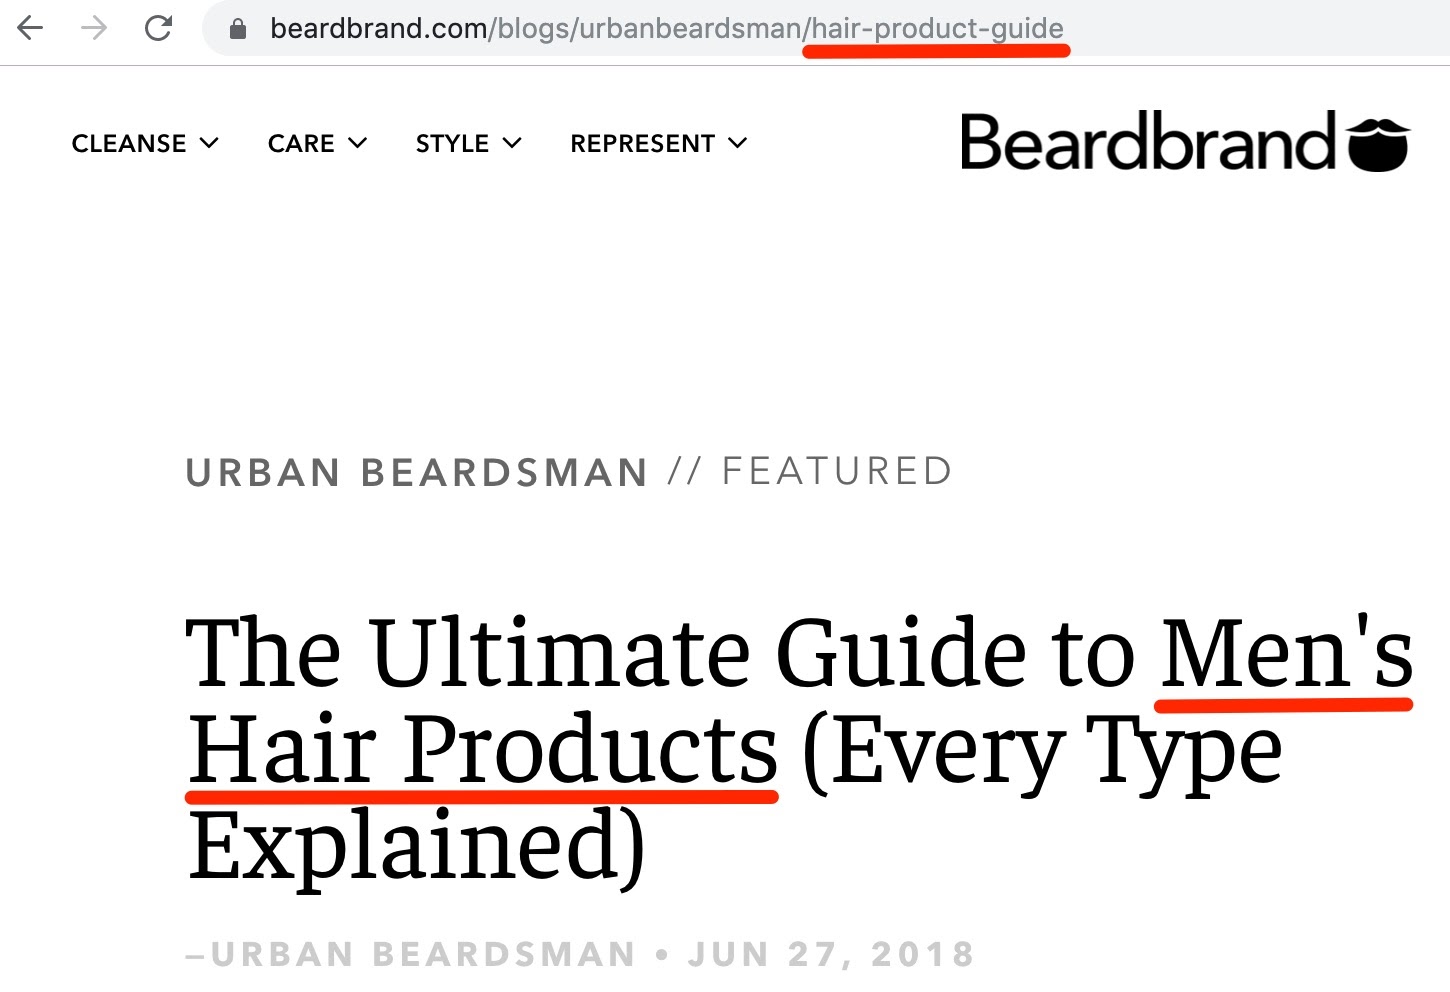 The Ultimate Guide to Men s Hair Products Every Type Explained Beardbrand